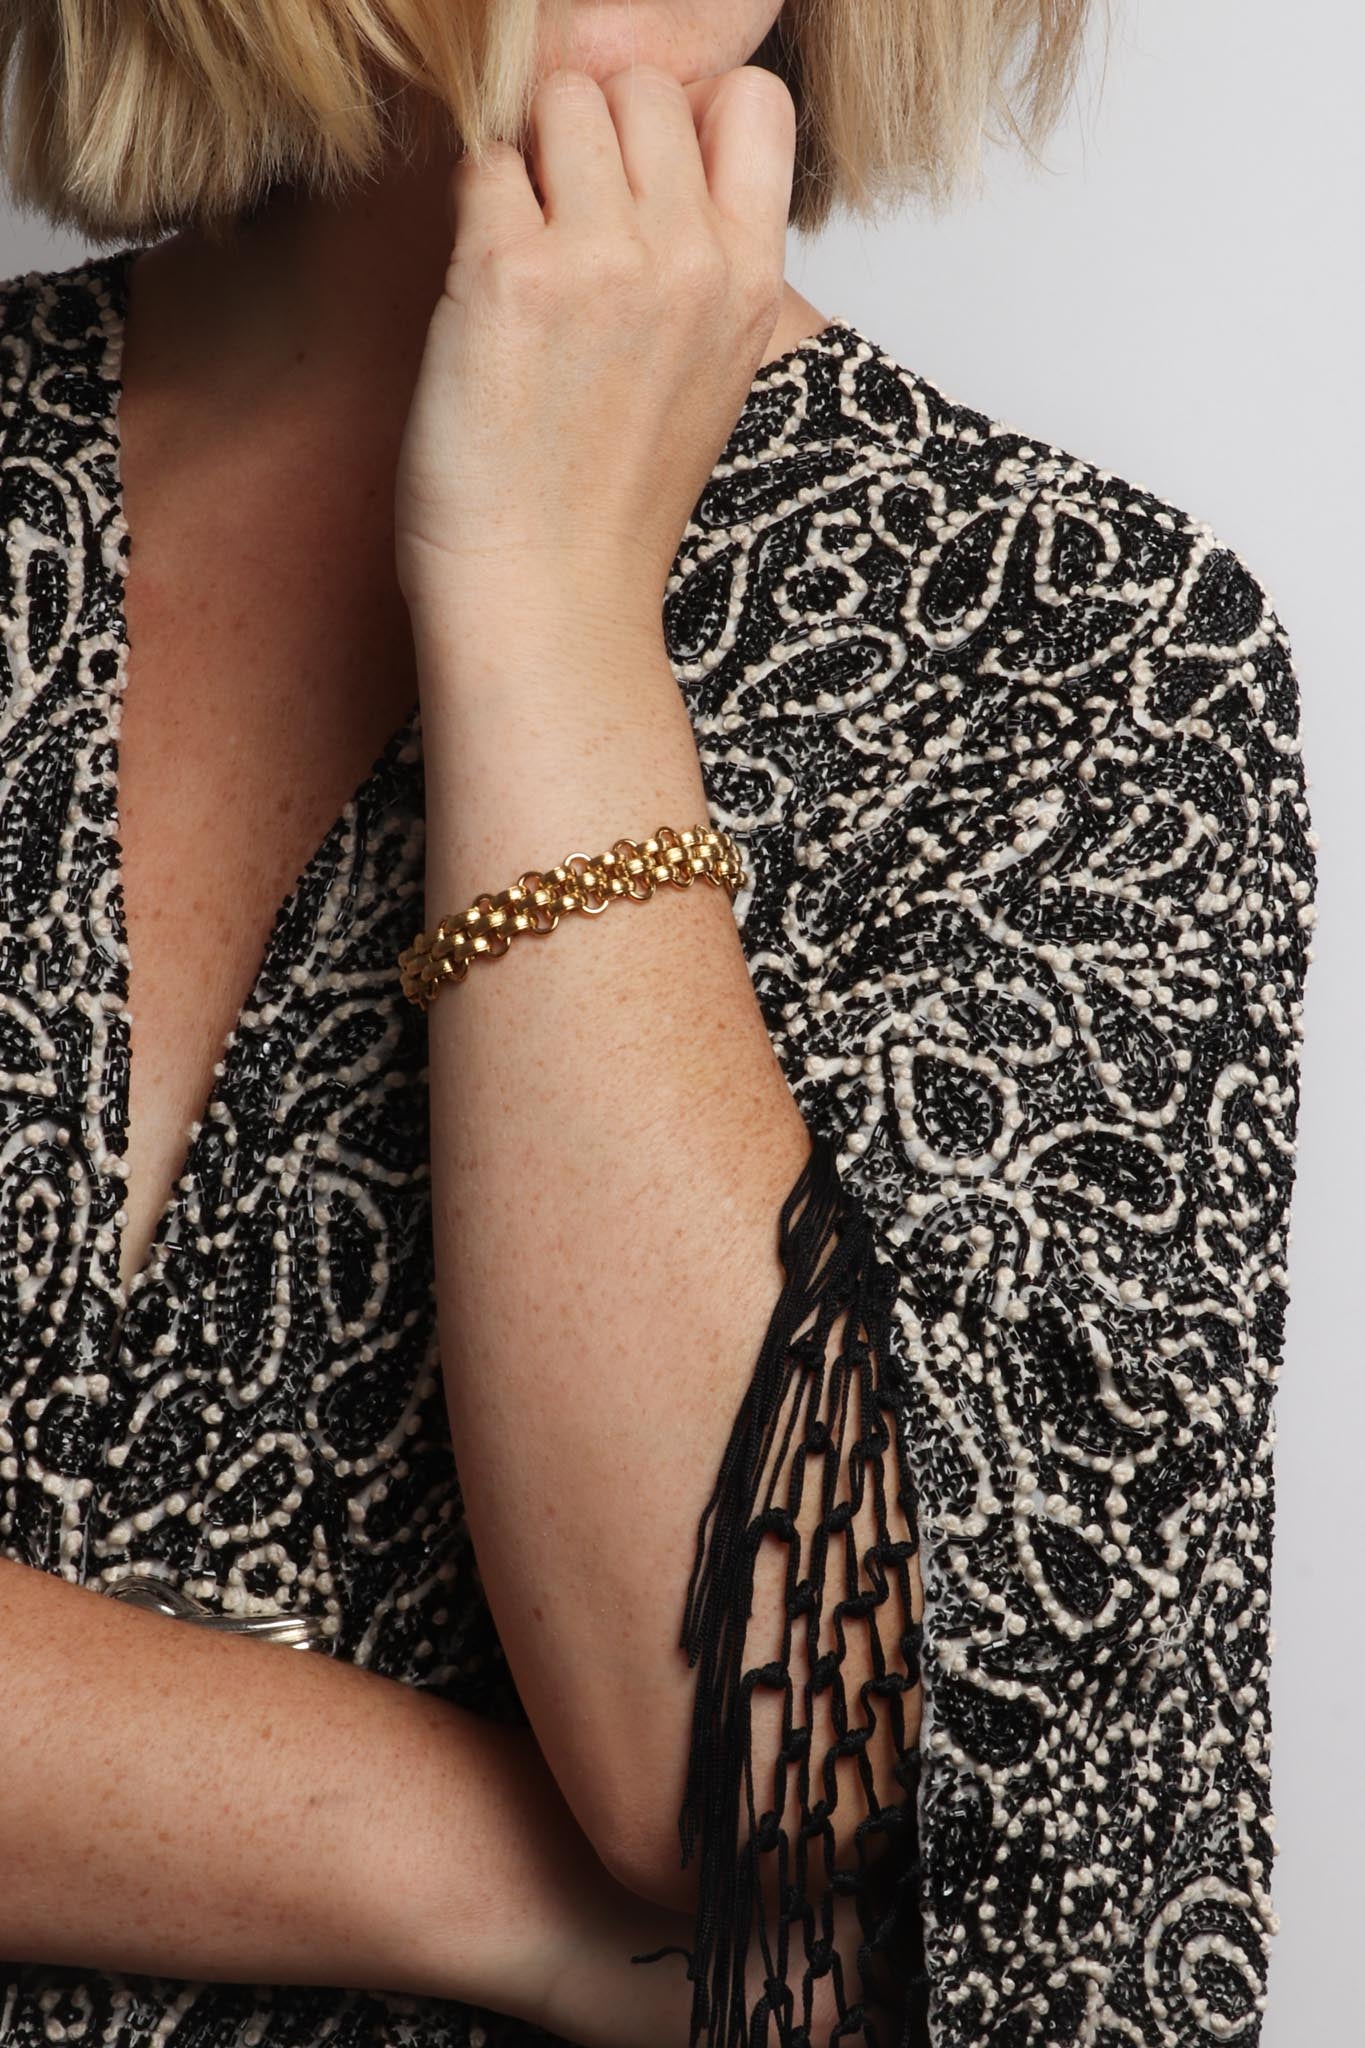 Marrin Costello wearing Marrin Costello Jewelry Lattice XL Bracelet woven chain bracelet with lobster clasp closure. Waterproof, sustainable, hypoallergenic. 14k gold plated stainless steel.